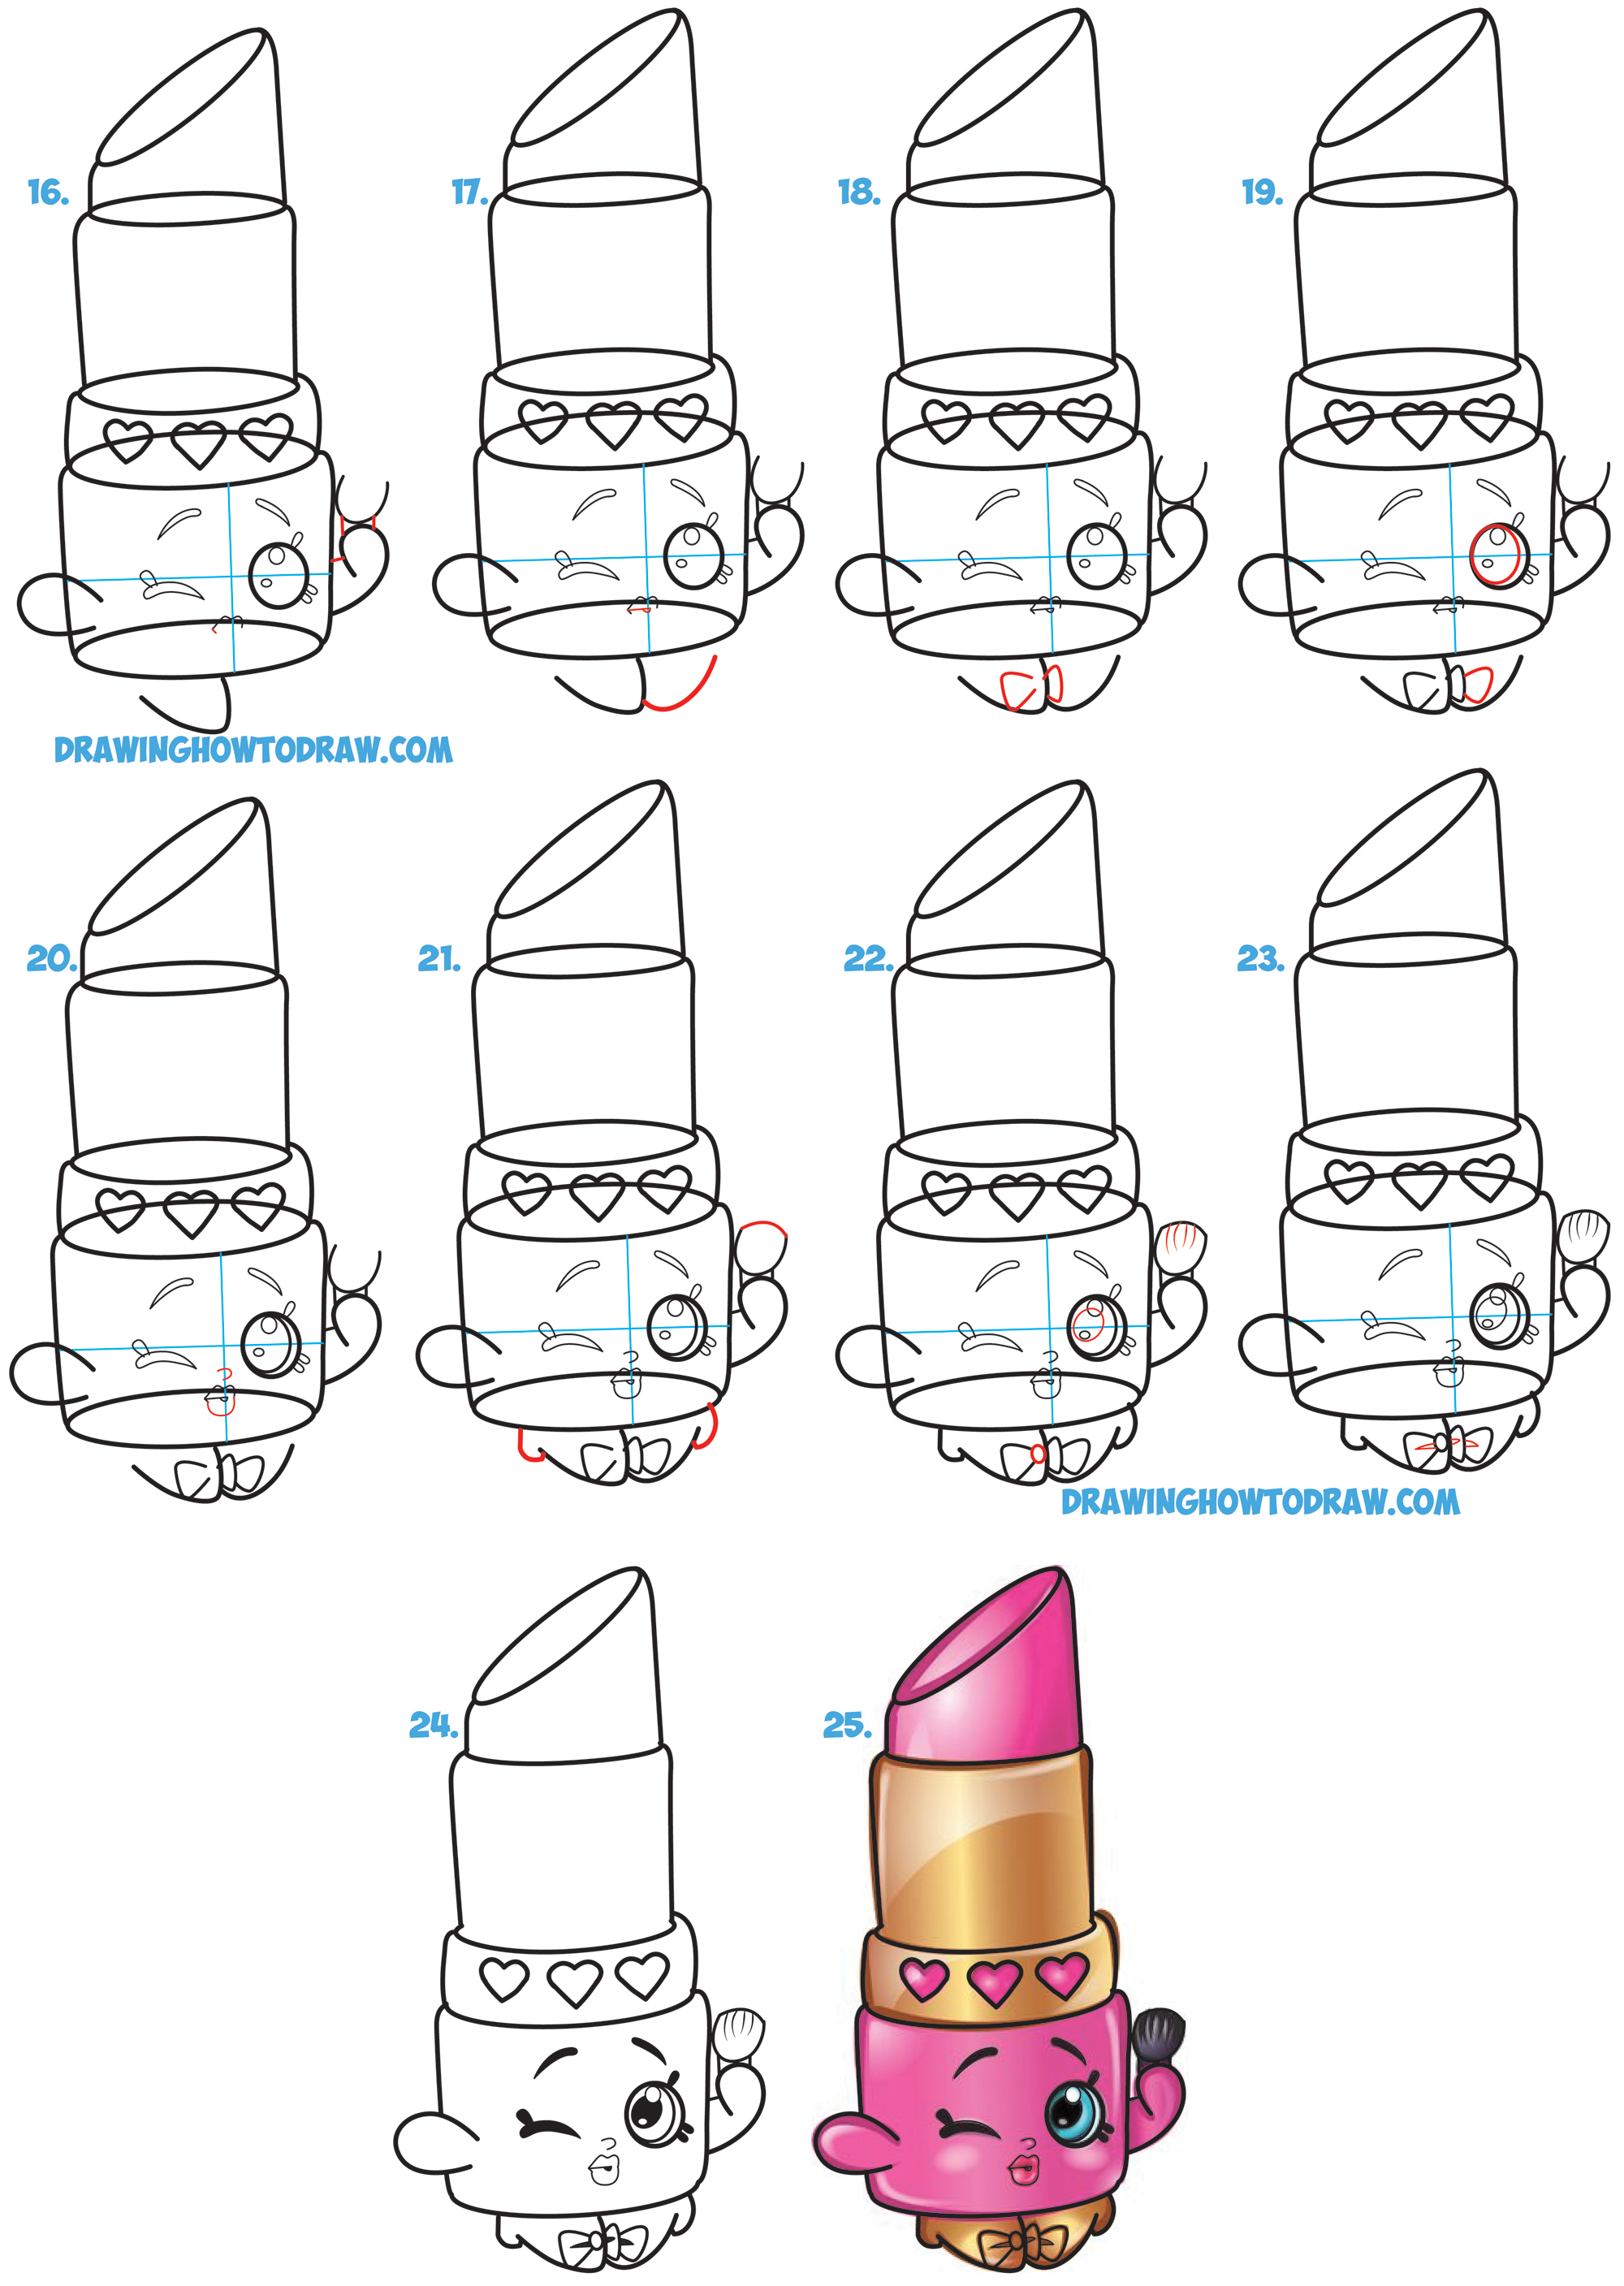 How To Draw Lippy Lips Cute Lipstick From Shopkins Easy Step By Step Drawing Tutorial For